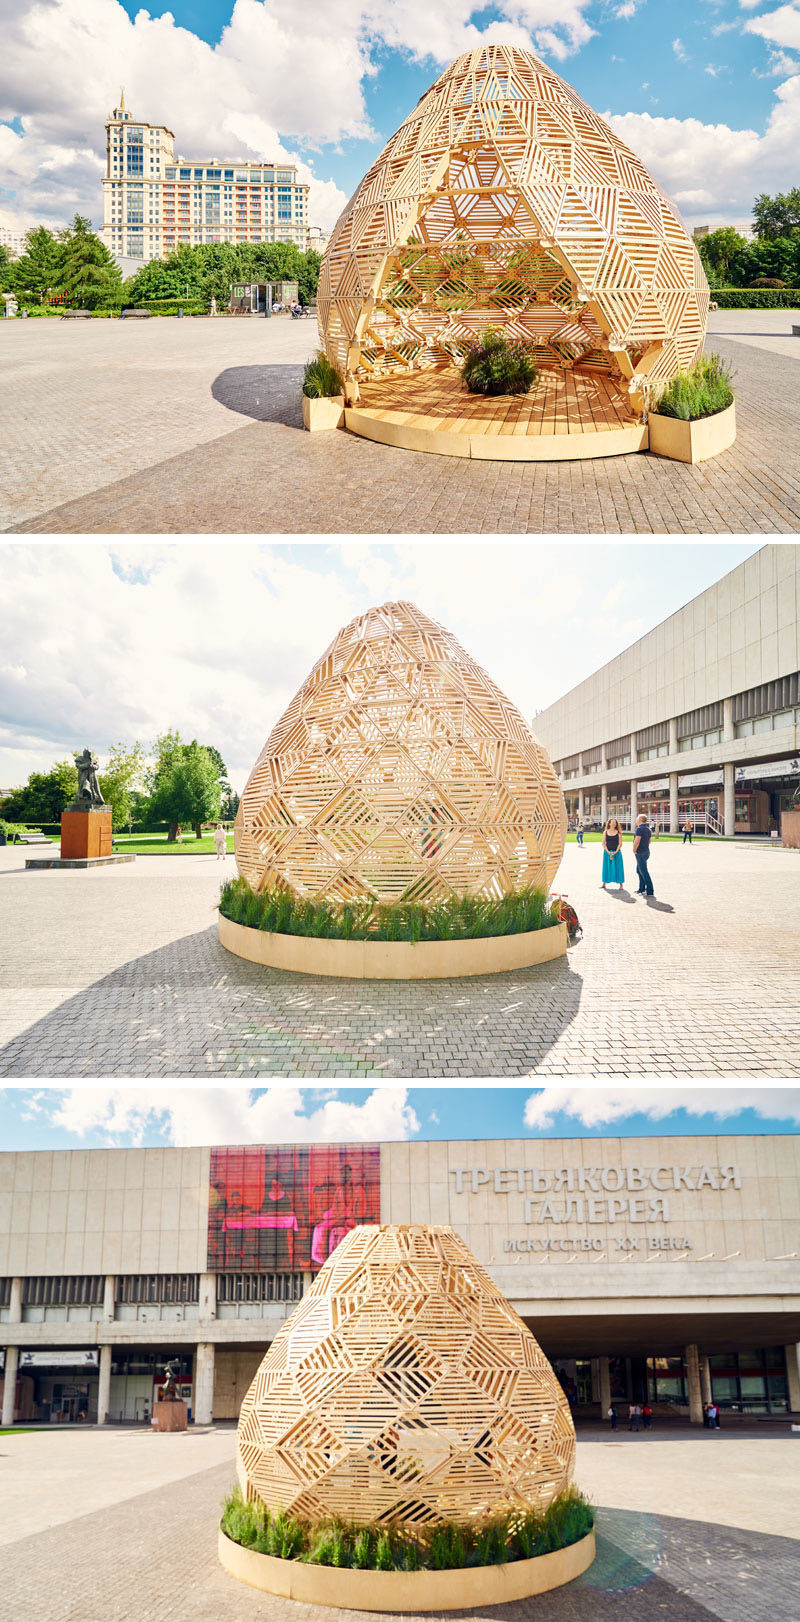 Russian designer Vlad Kissel, has created a modern wood pavilion in Moscow, Russia, that has a drop like shape that references early Slavonic aesthetics.